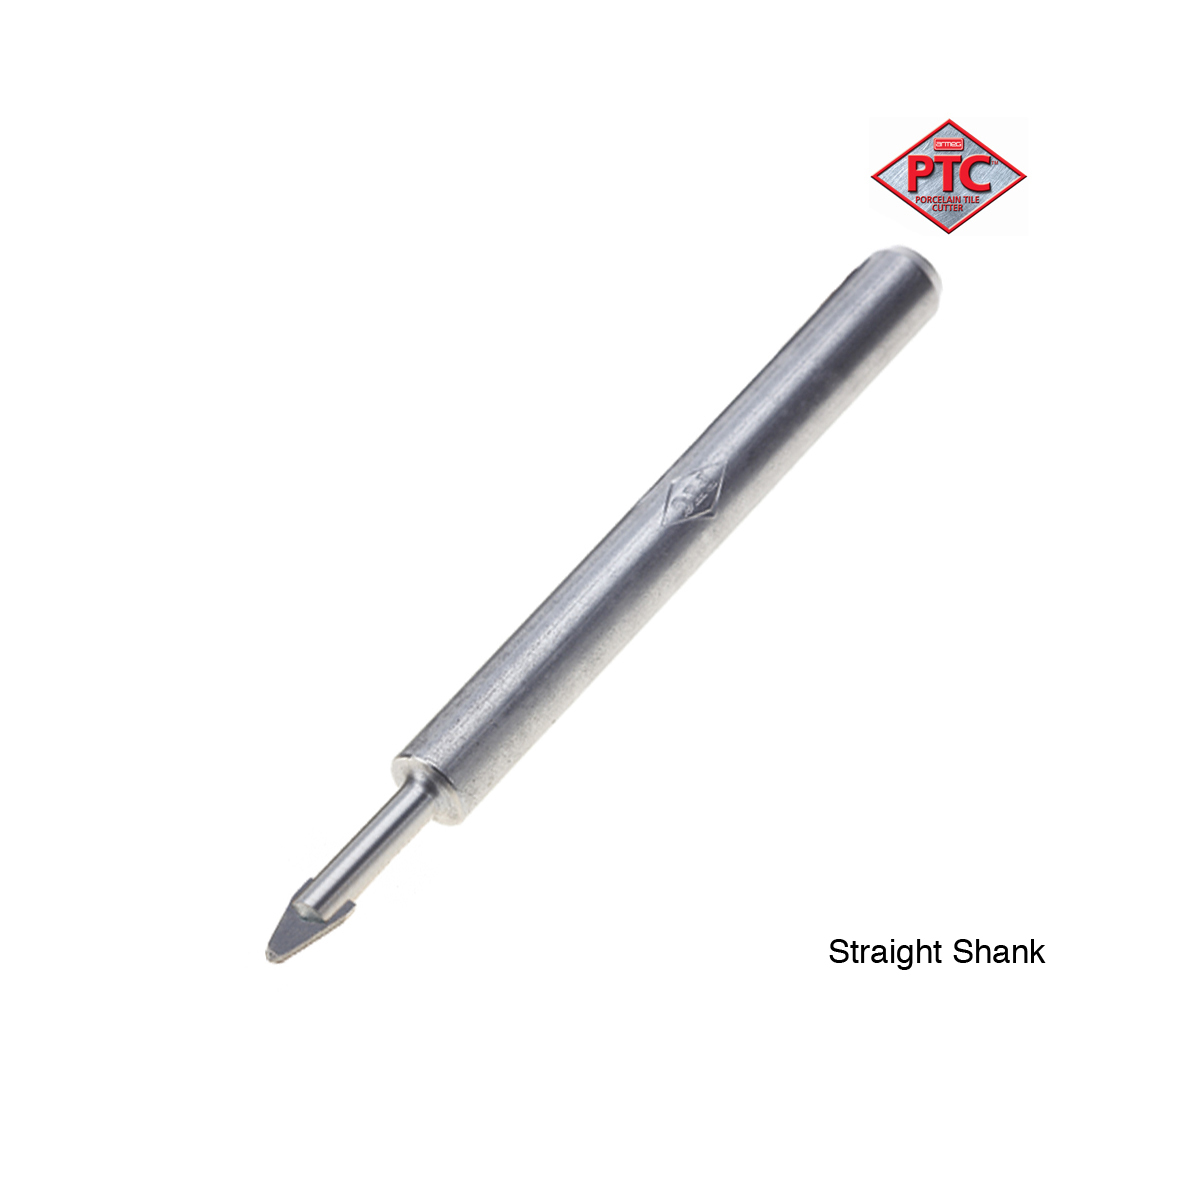 Porcelain Tile Drill Bits, What Is The Best Porcelain Tile Drill Bit